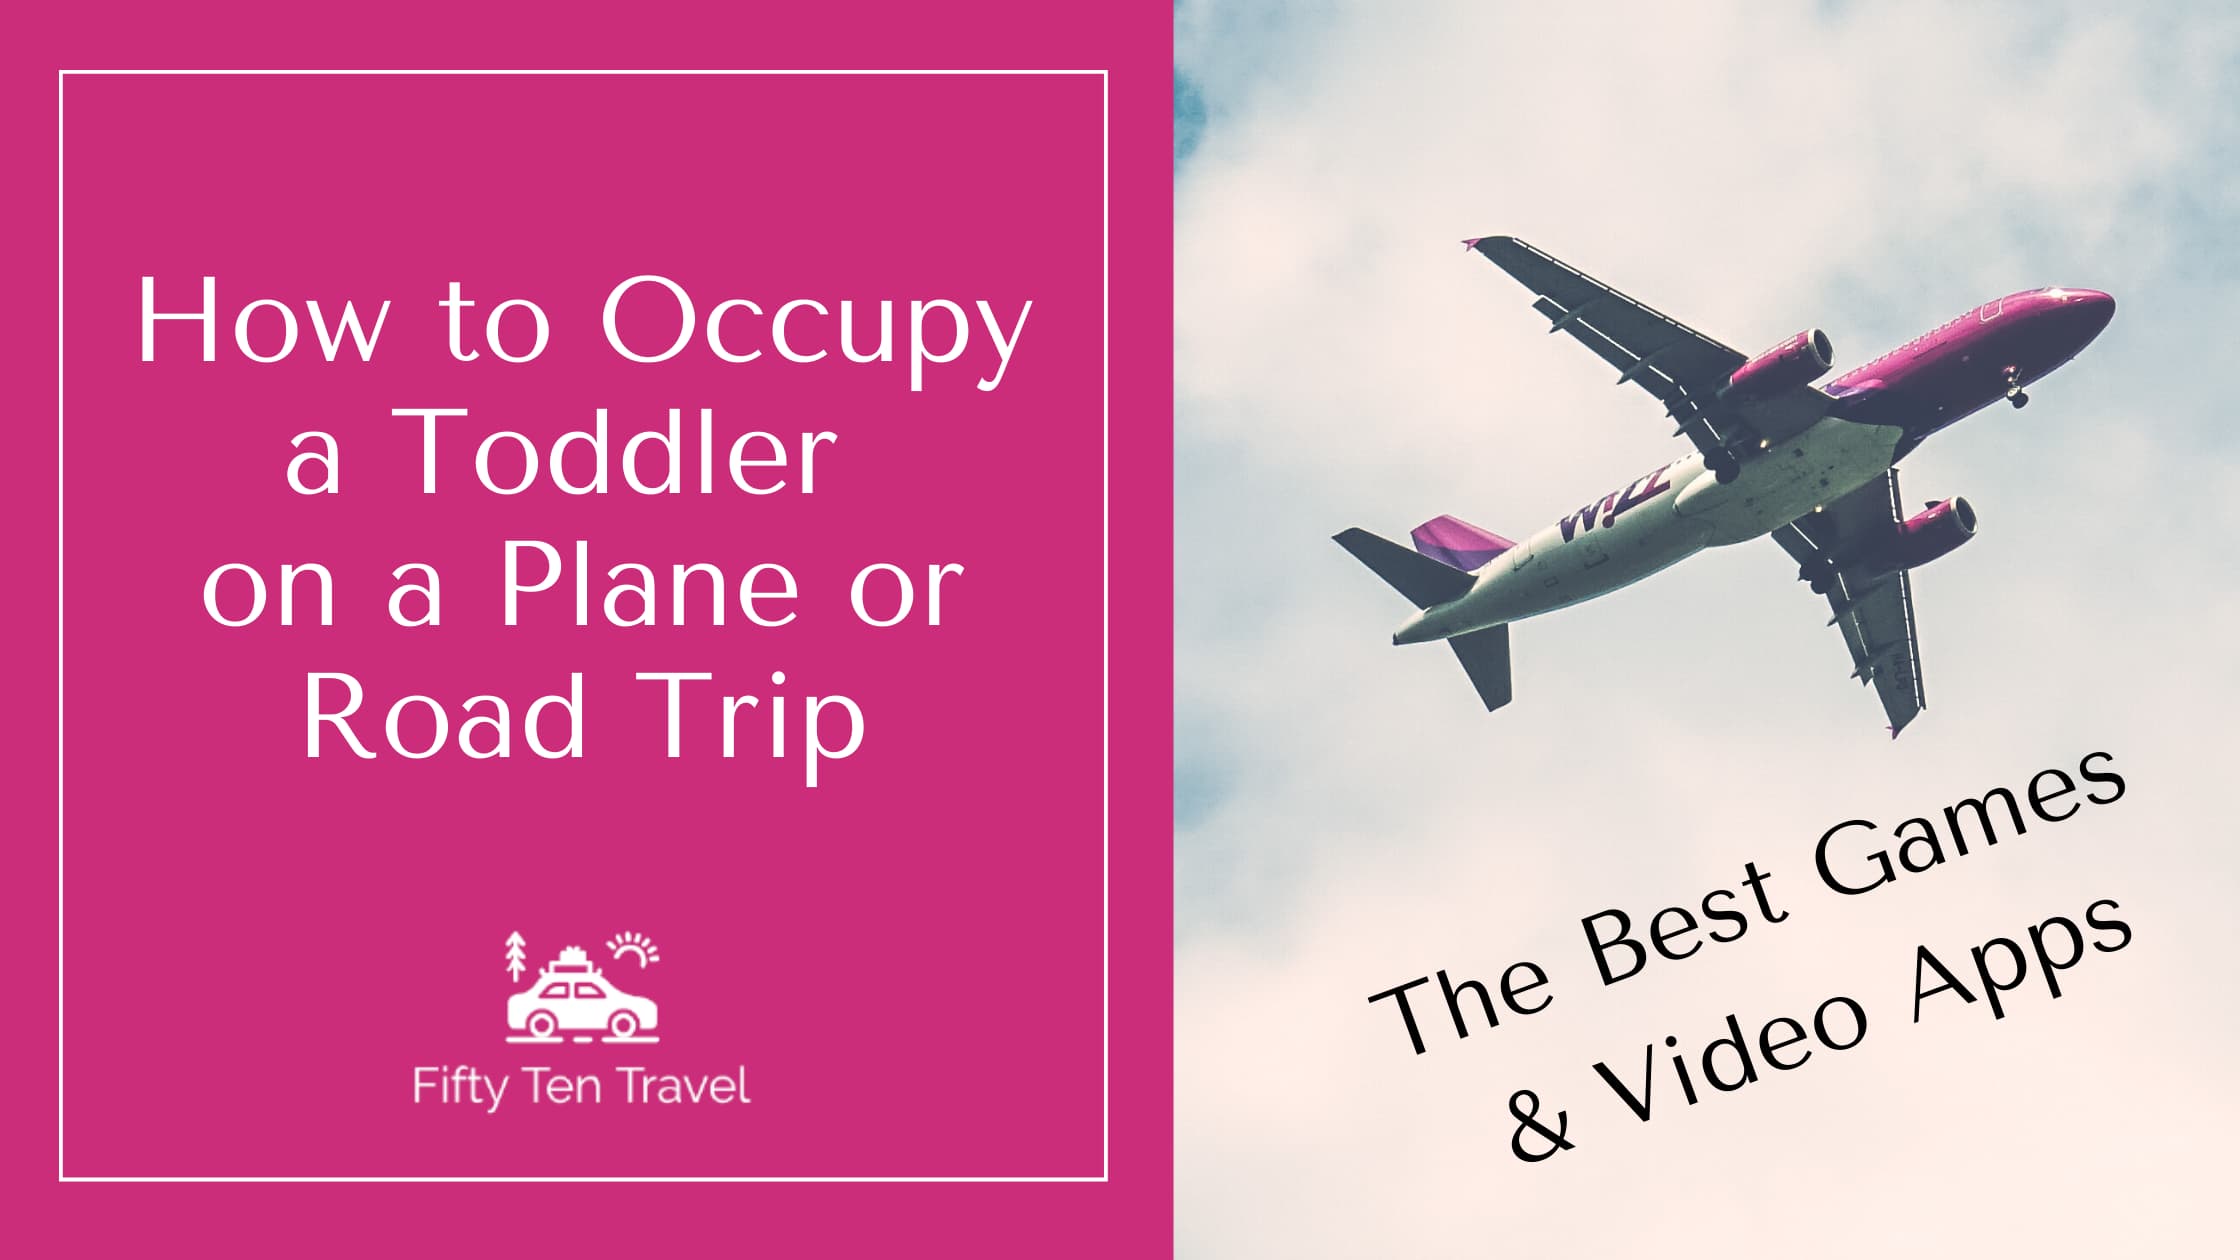 How to Occupy a Toddler on a Plane or Road Trip